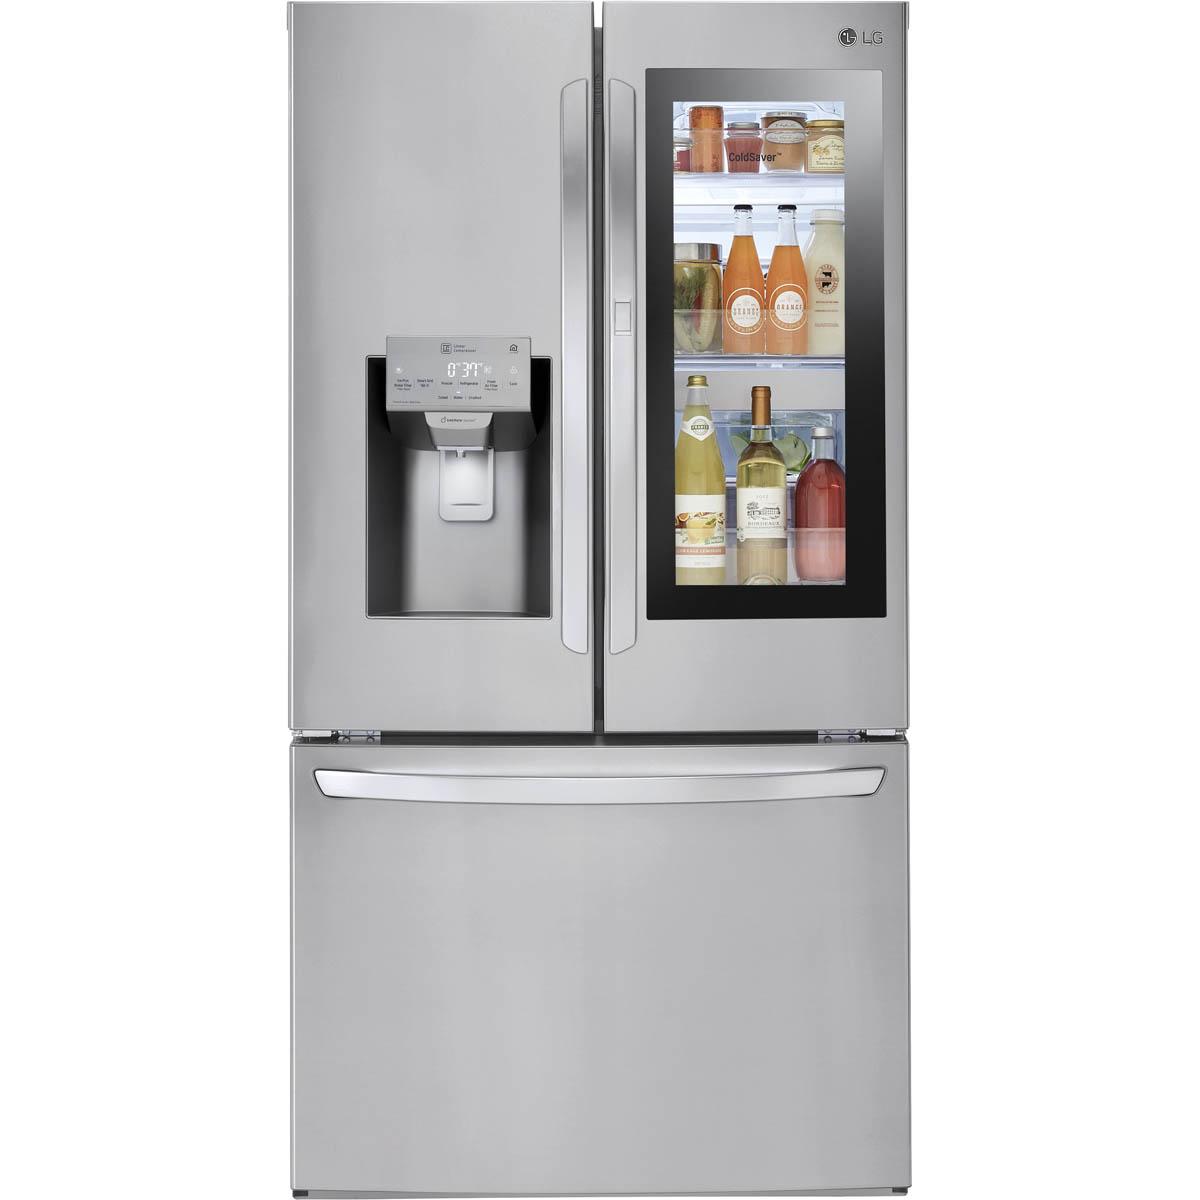 LG Wifi Enabled InstaView Refrigerator LFXS28596S for $1999.99 Shipped